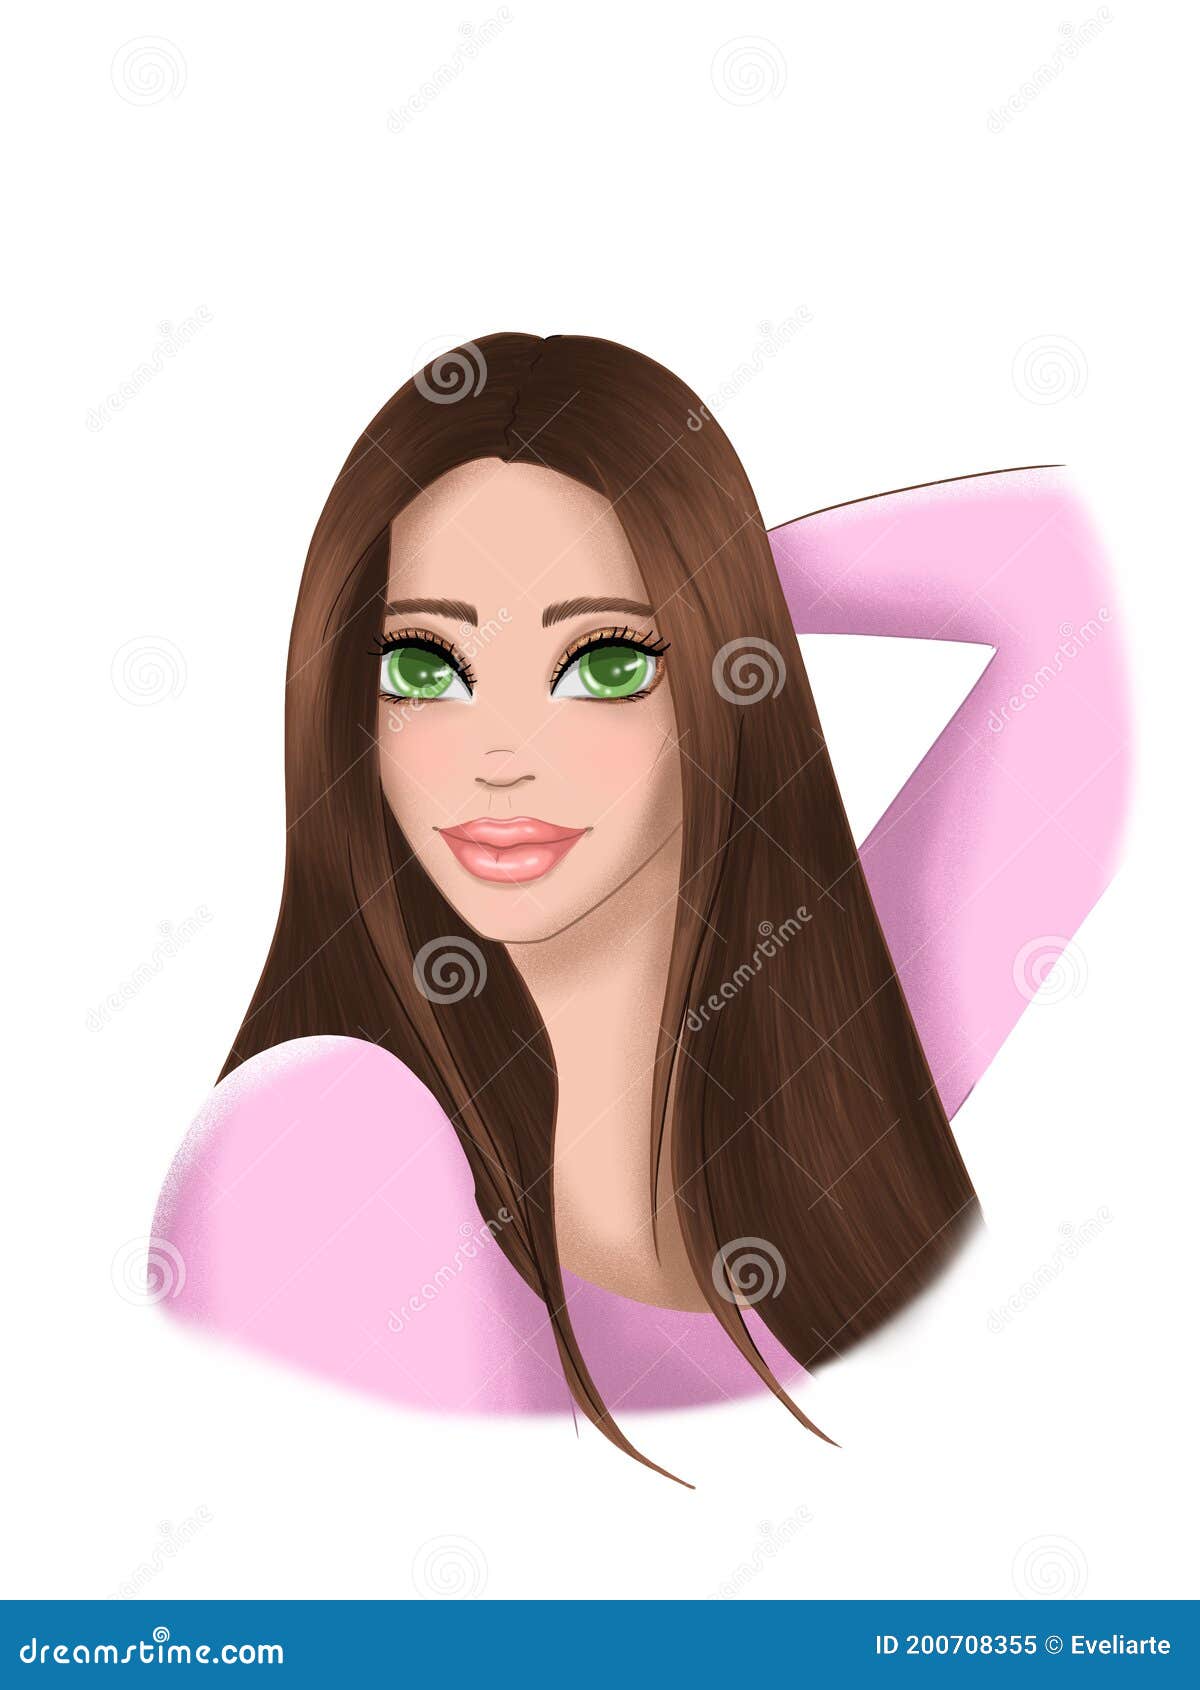 Cartoon Woman Character with Long Brown Hair,big Green Eyes and Pink Lips.  Stock Illustration - Illustration of fashiongirl, beautiful: 200708355